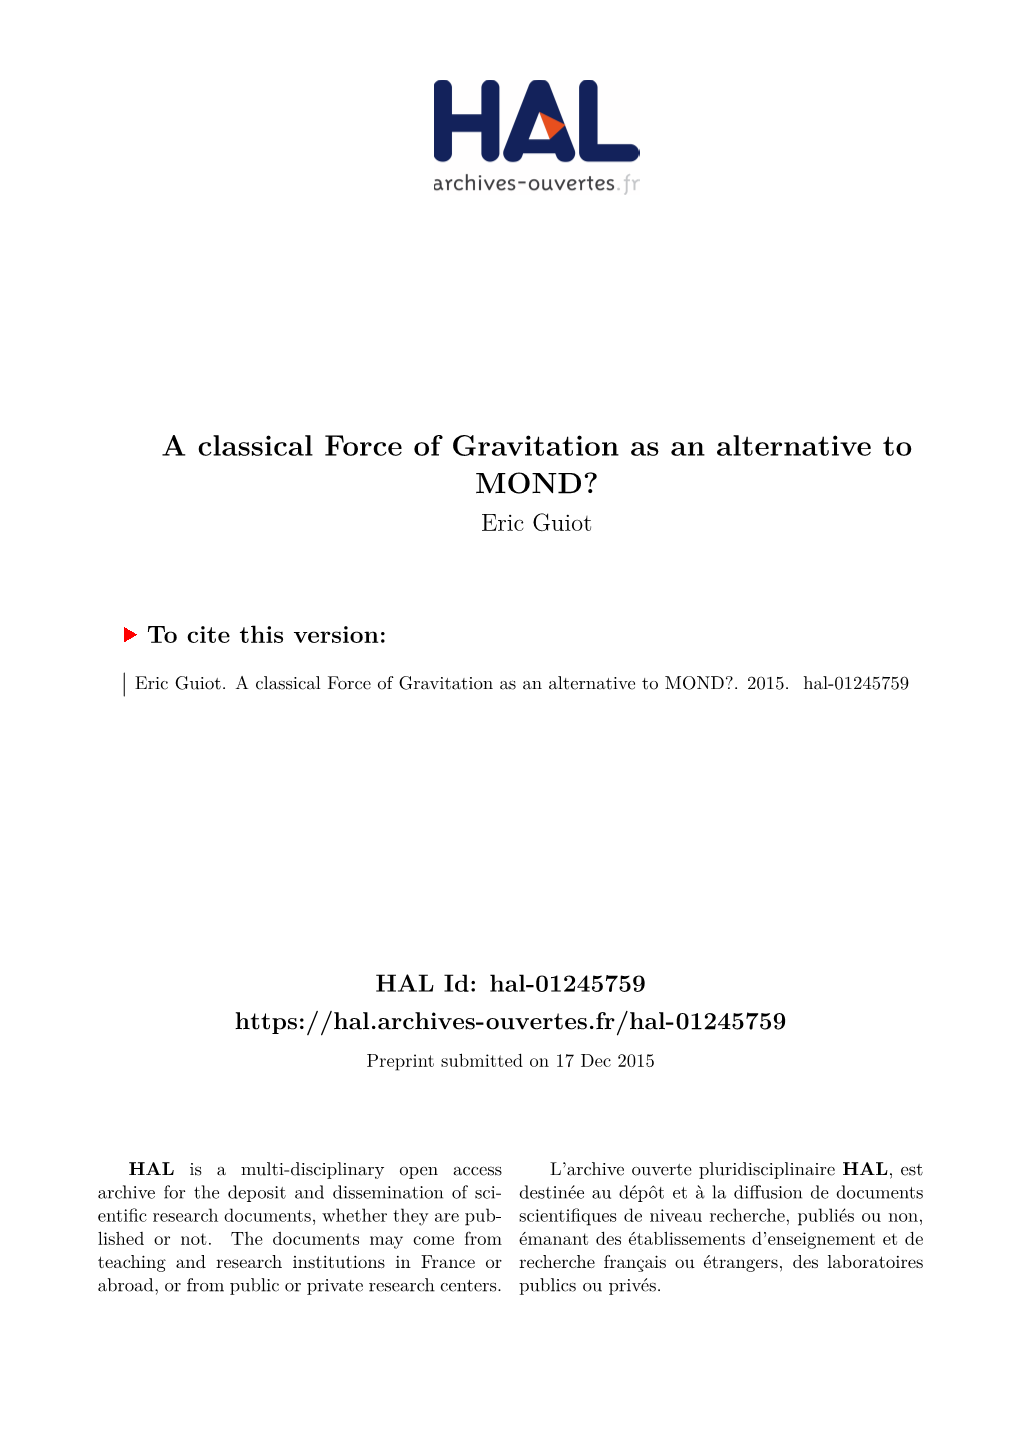 A Classical Force of Gravitation As an Alternative to MOND? Eric Guiot